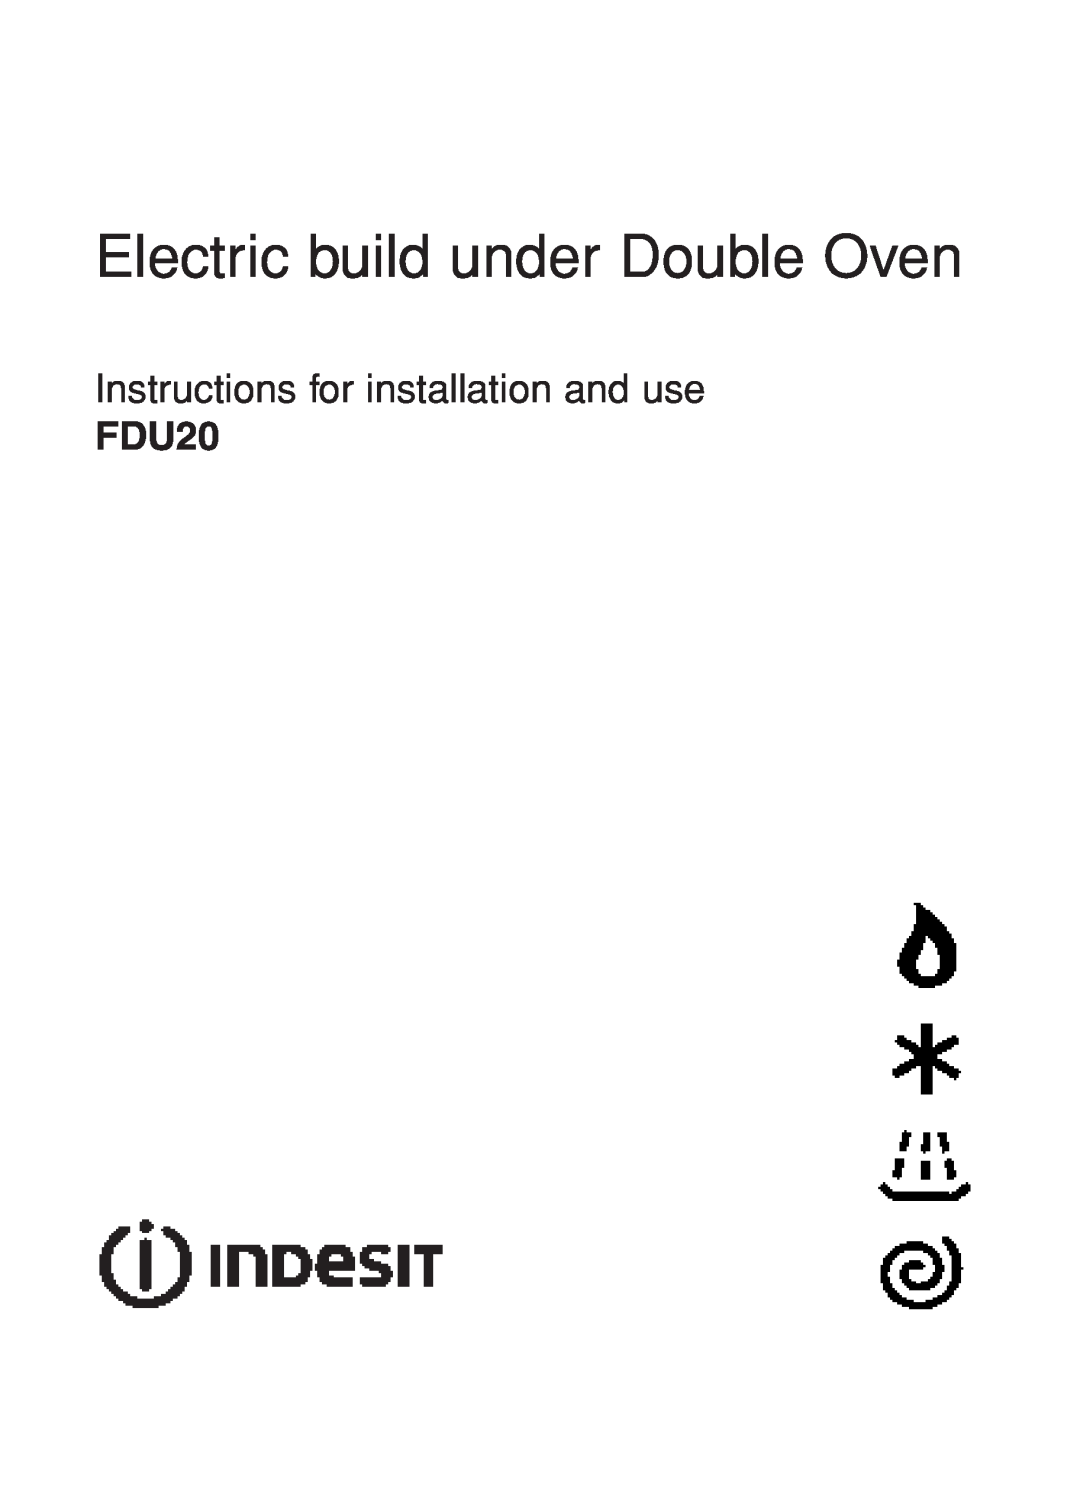 Indesit FDU20 manual Electric build under Double Oven, Instructions for installation and use 